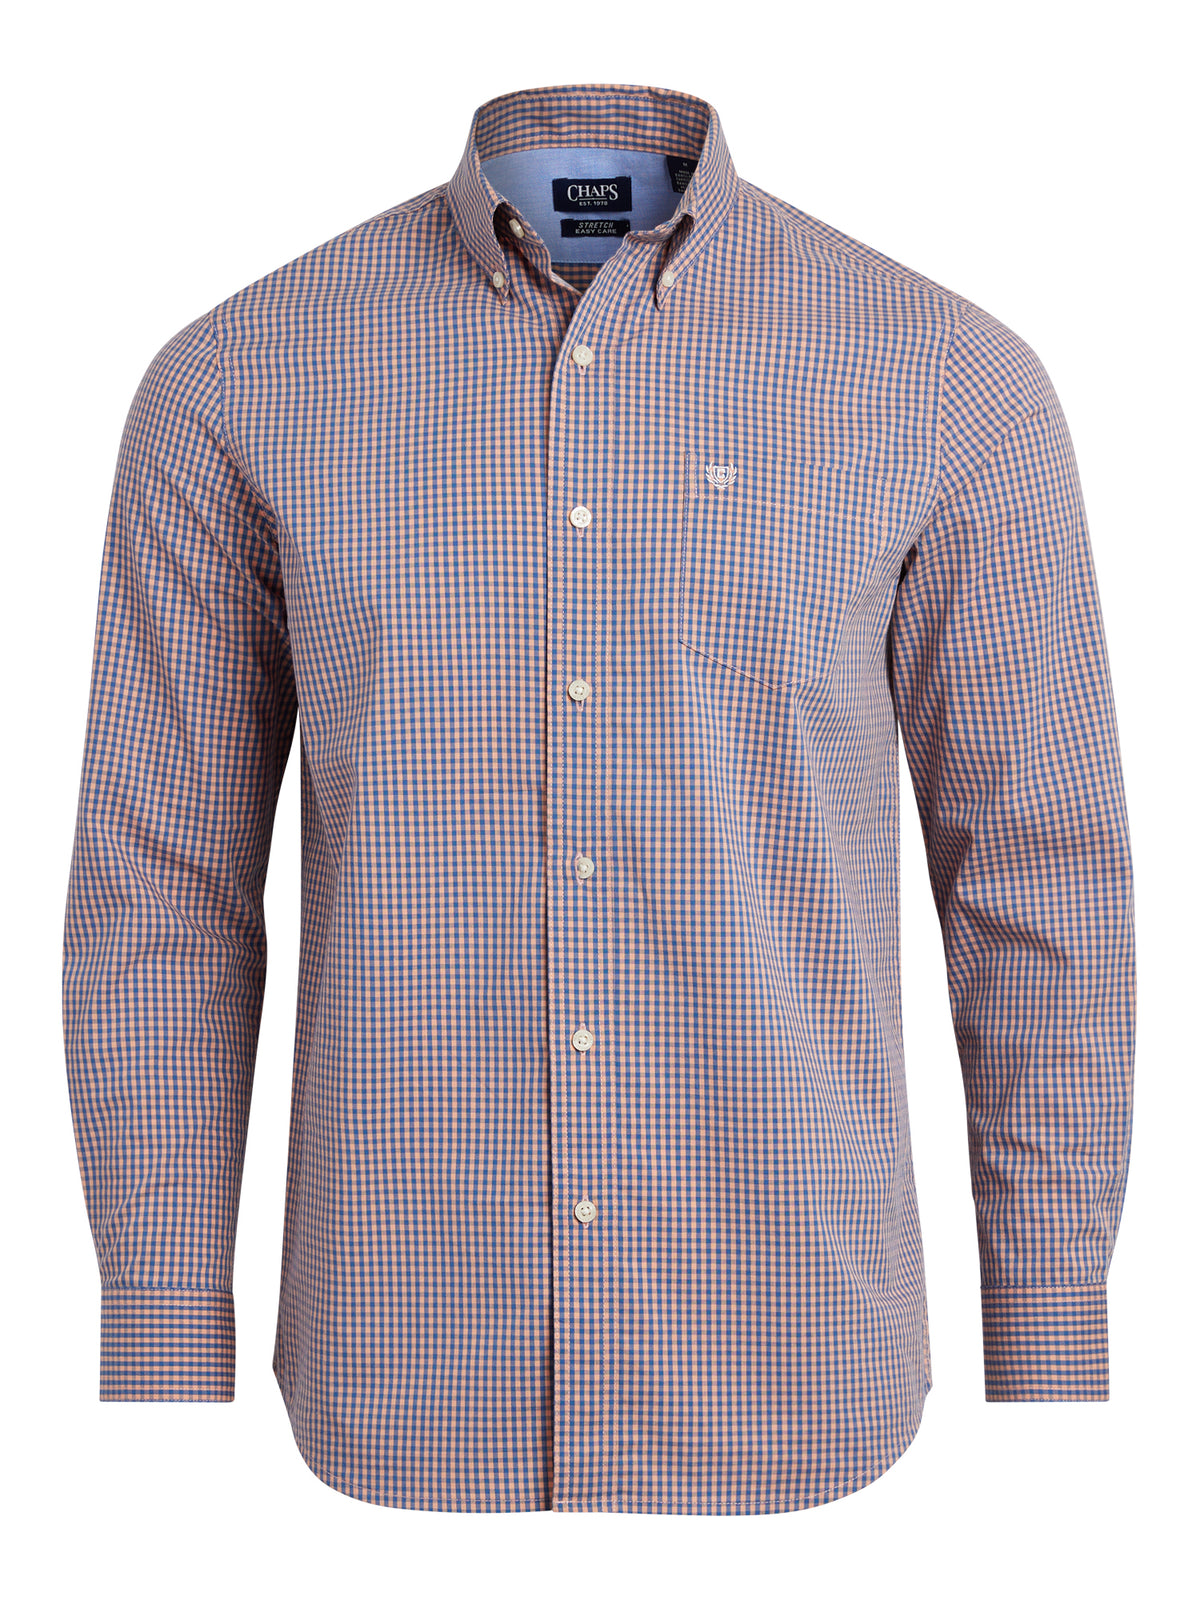 Chaps Long Sleeve Stretch EzCare Woven